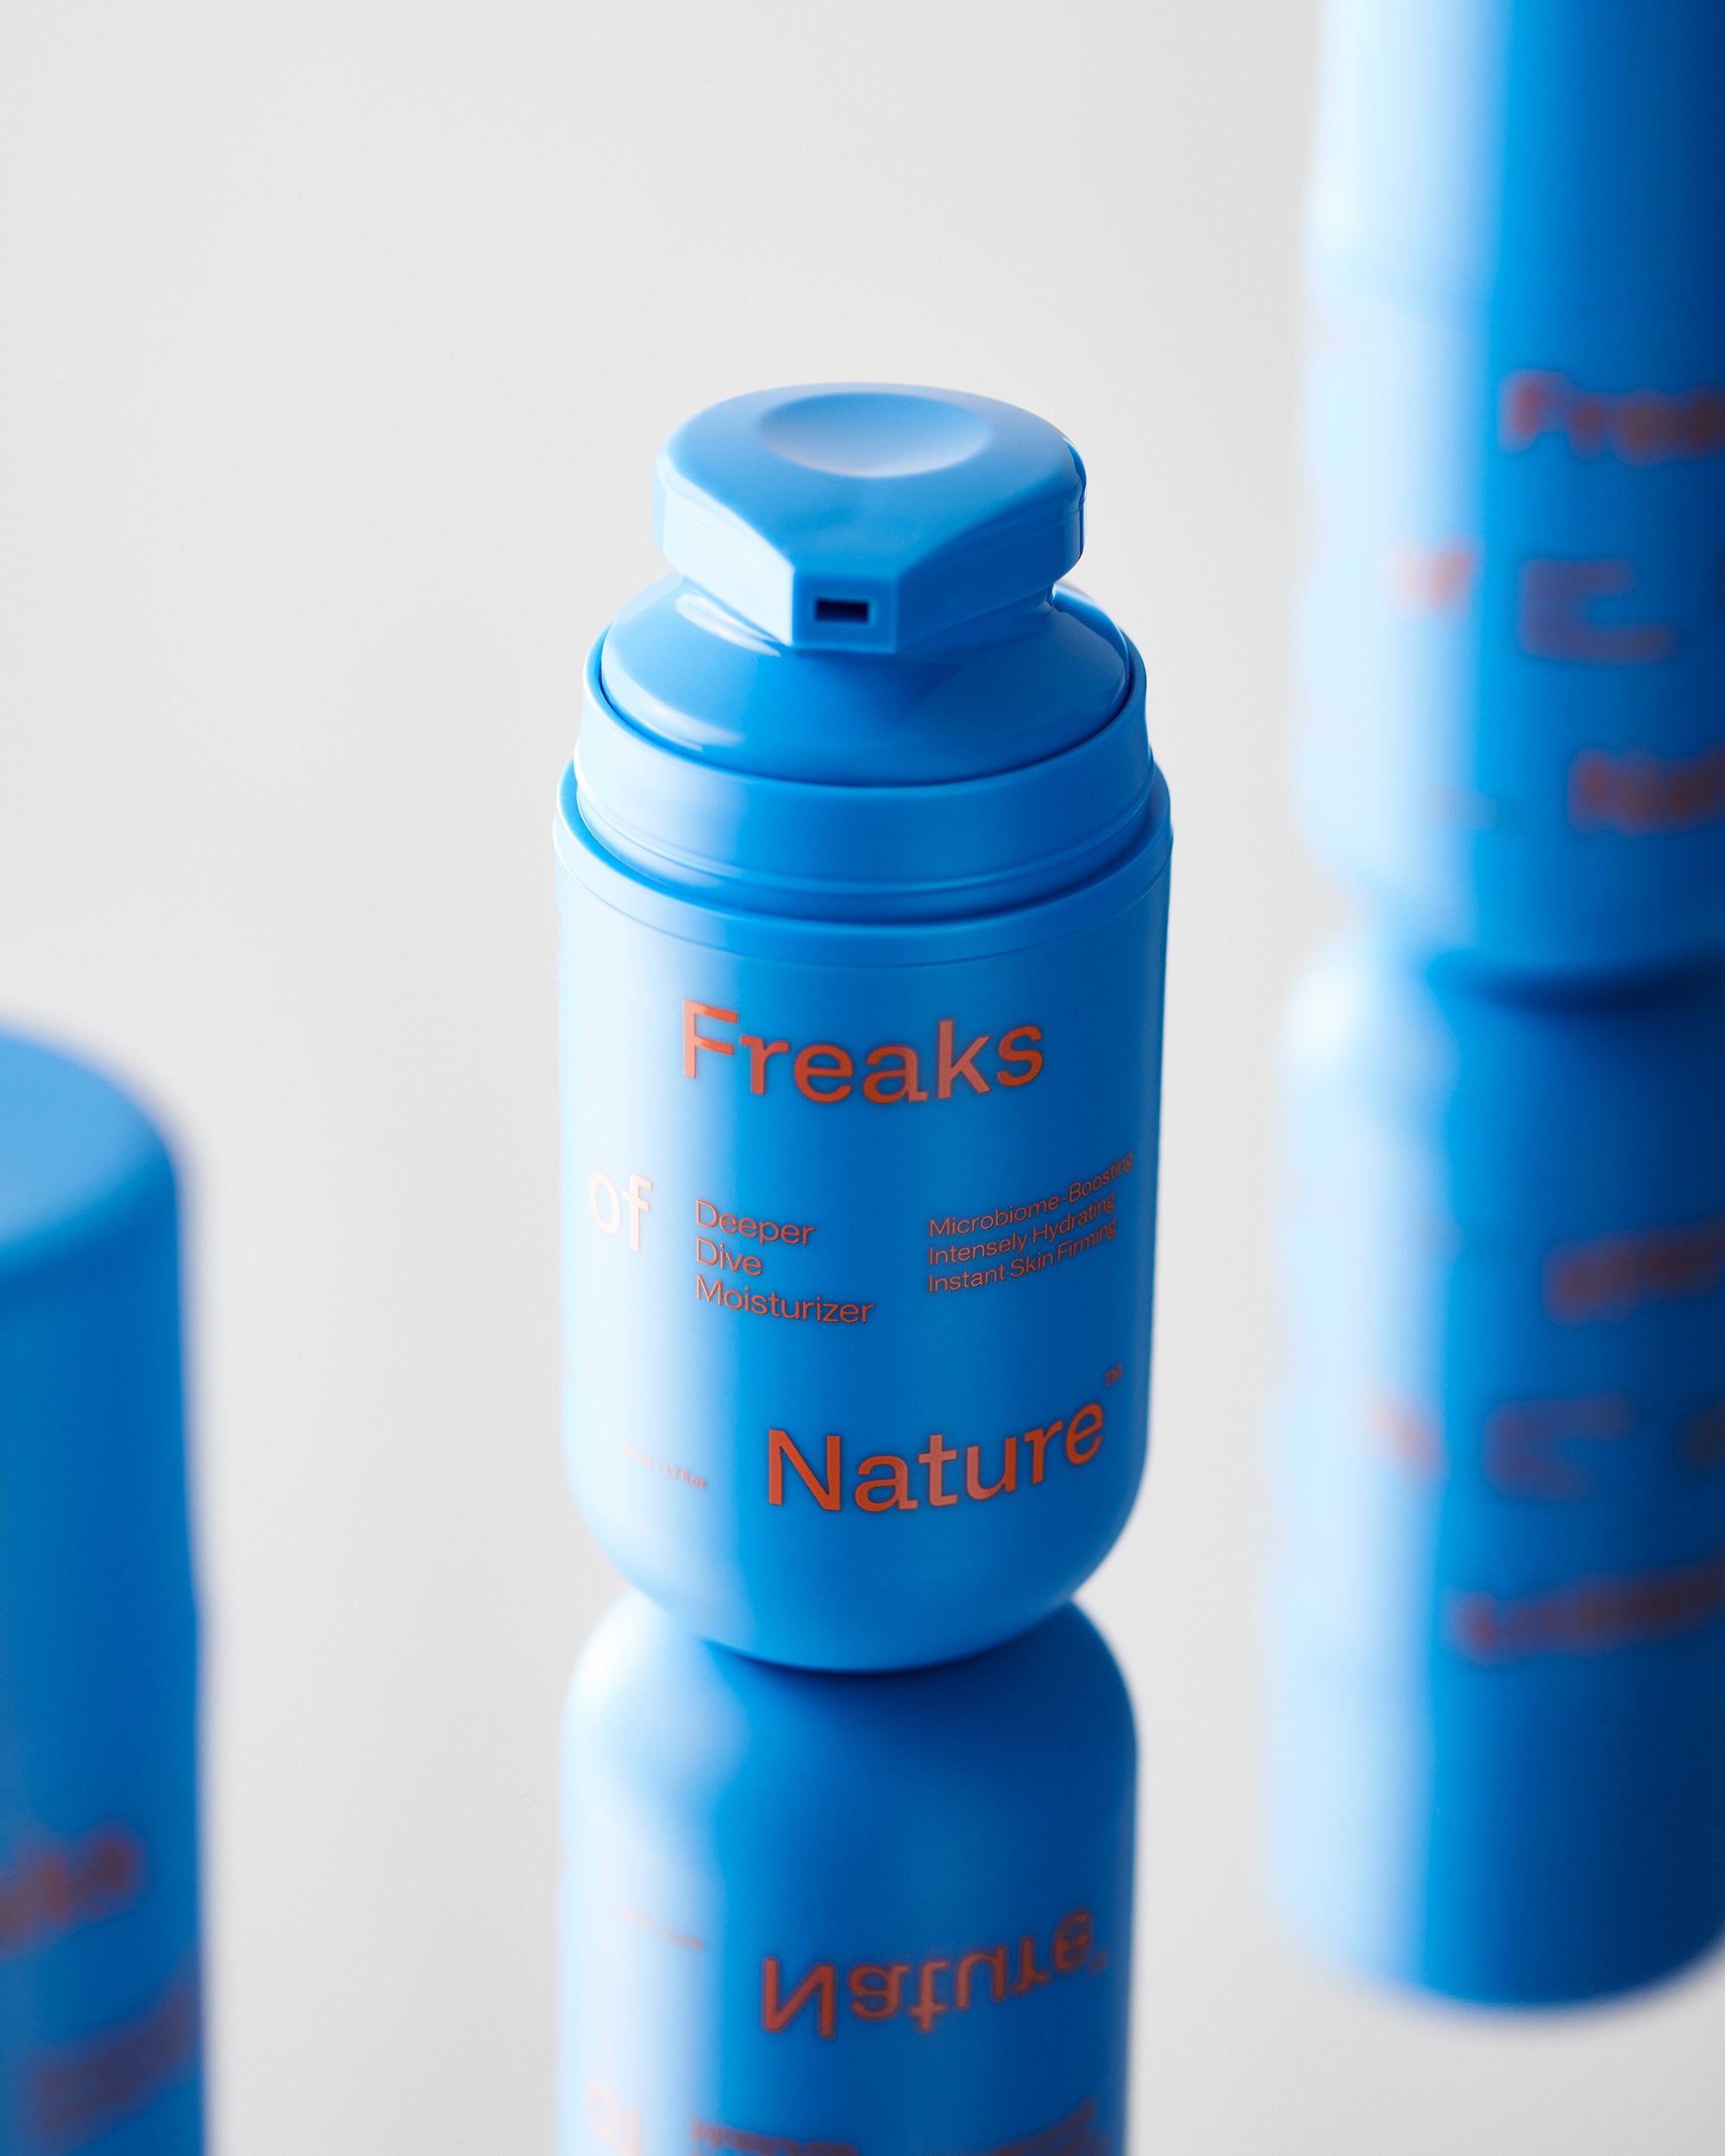 A vibrant blue cylindrical bottle labeled "Freaks of Nature Skincare Deeper Dive Moisturizer" with red text, featuring a flip-top cap. Infused with vegan shark Squalane, it promises optimal hydration and microbiome-balancing. The bottle stands upright on a reflective surface, with partial reflections of similar bottles in the background.